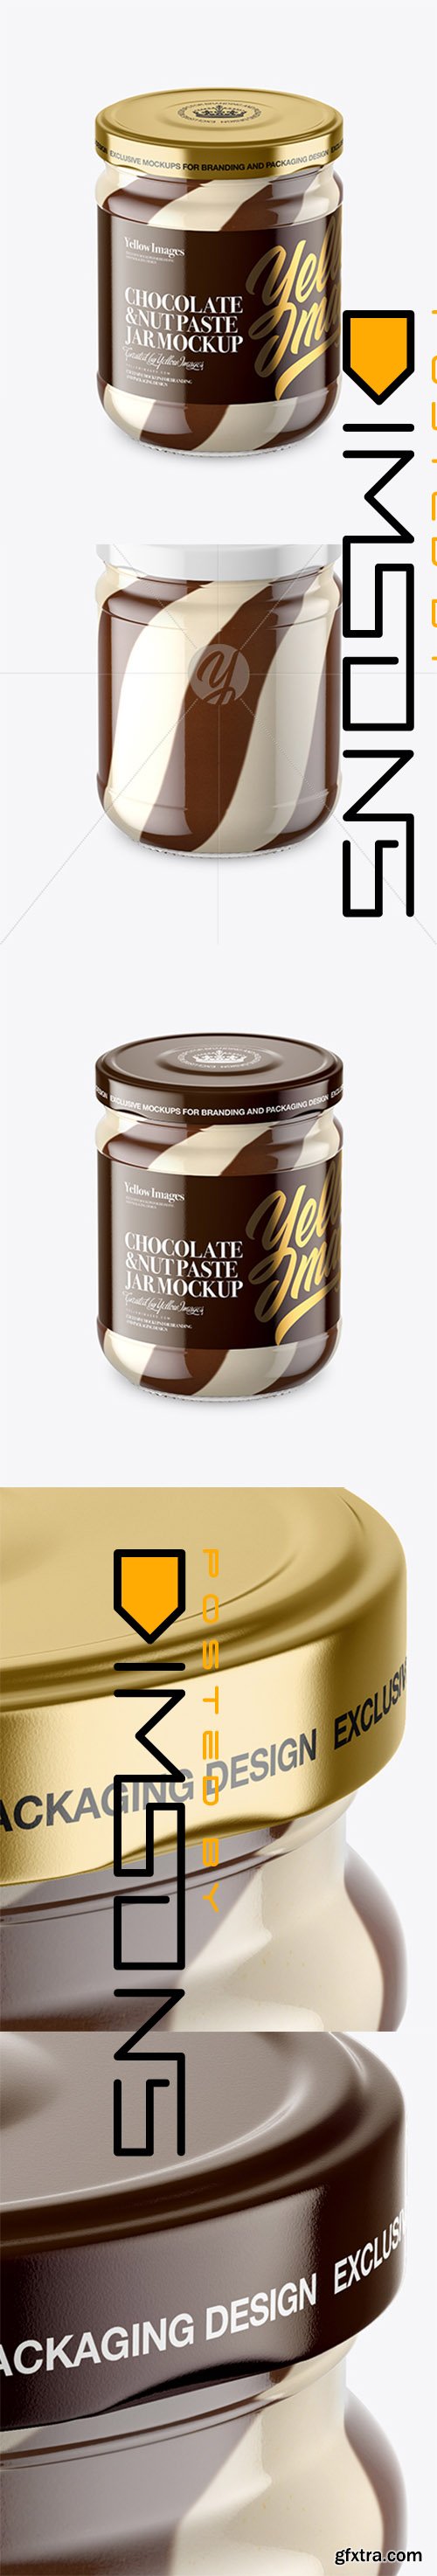 Clear Glass Jar with Duo Chocolate Spread Mockup 33751